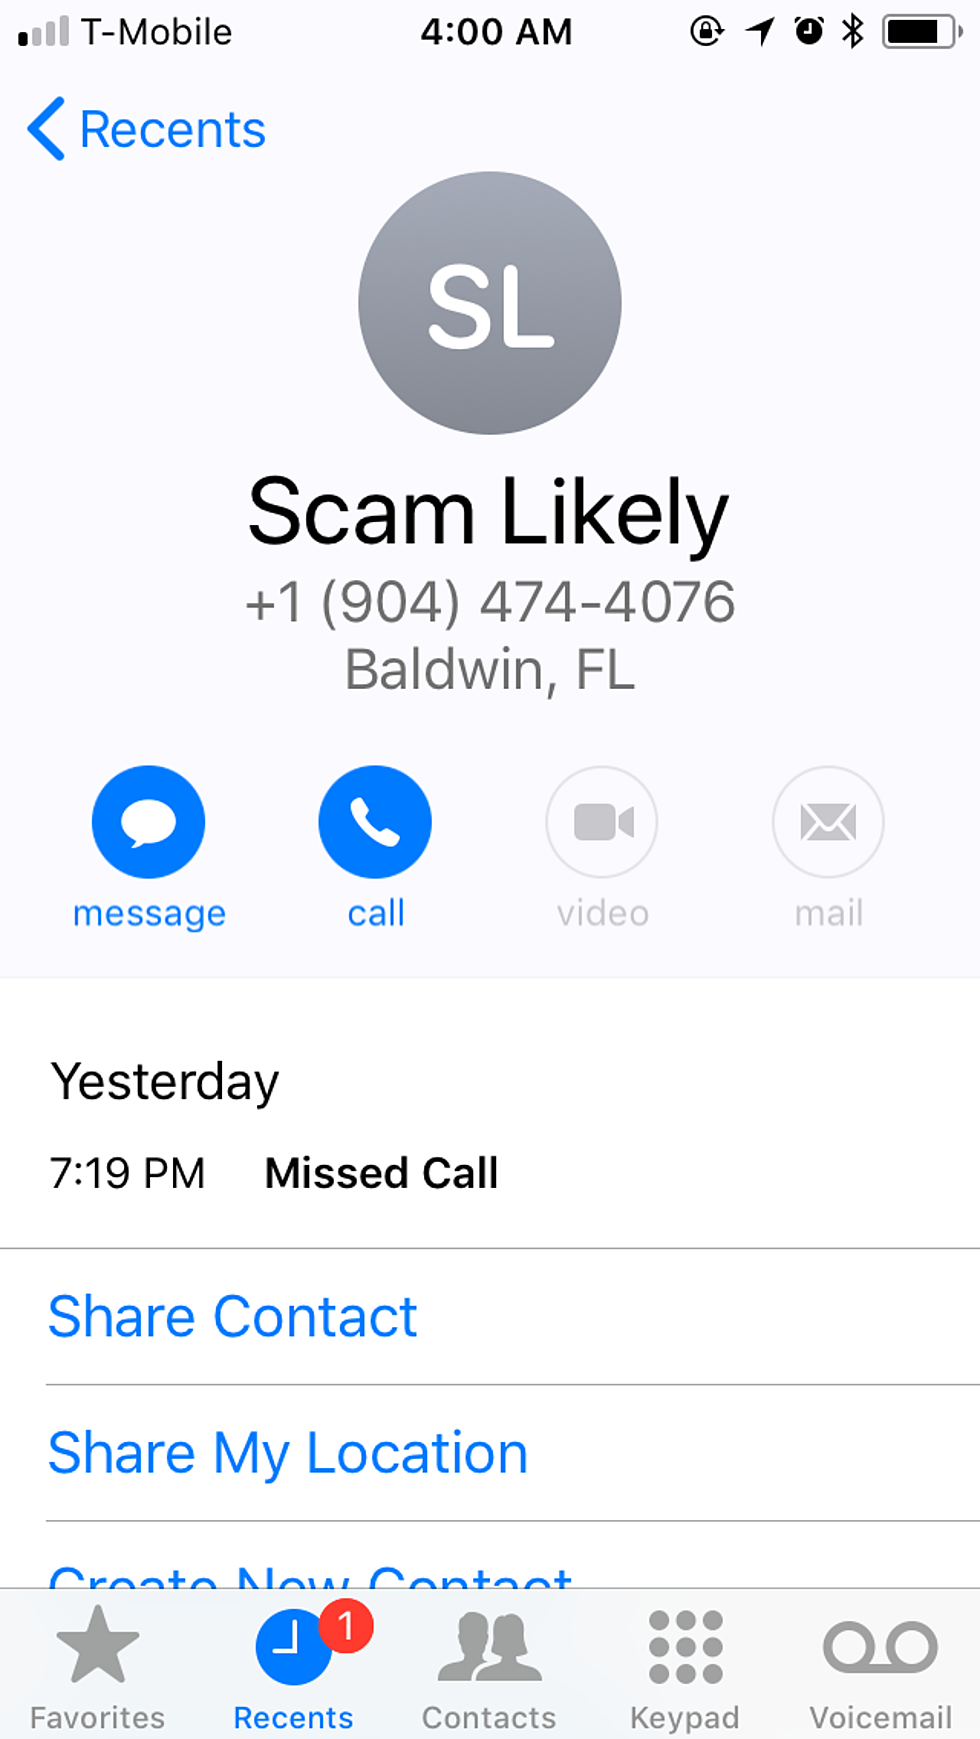 Has Your Friend &#8220;Scam Likely&#8221; Been Calling You Too?